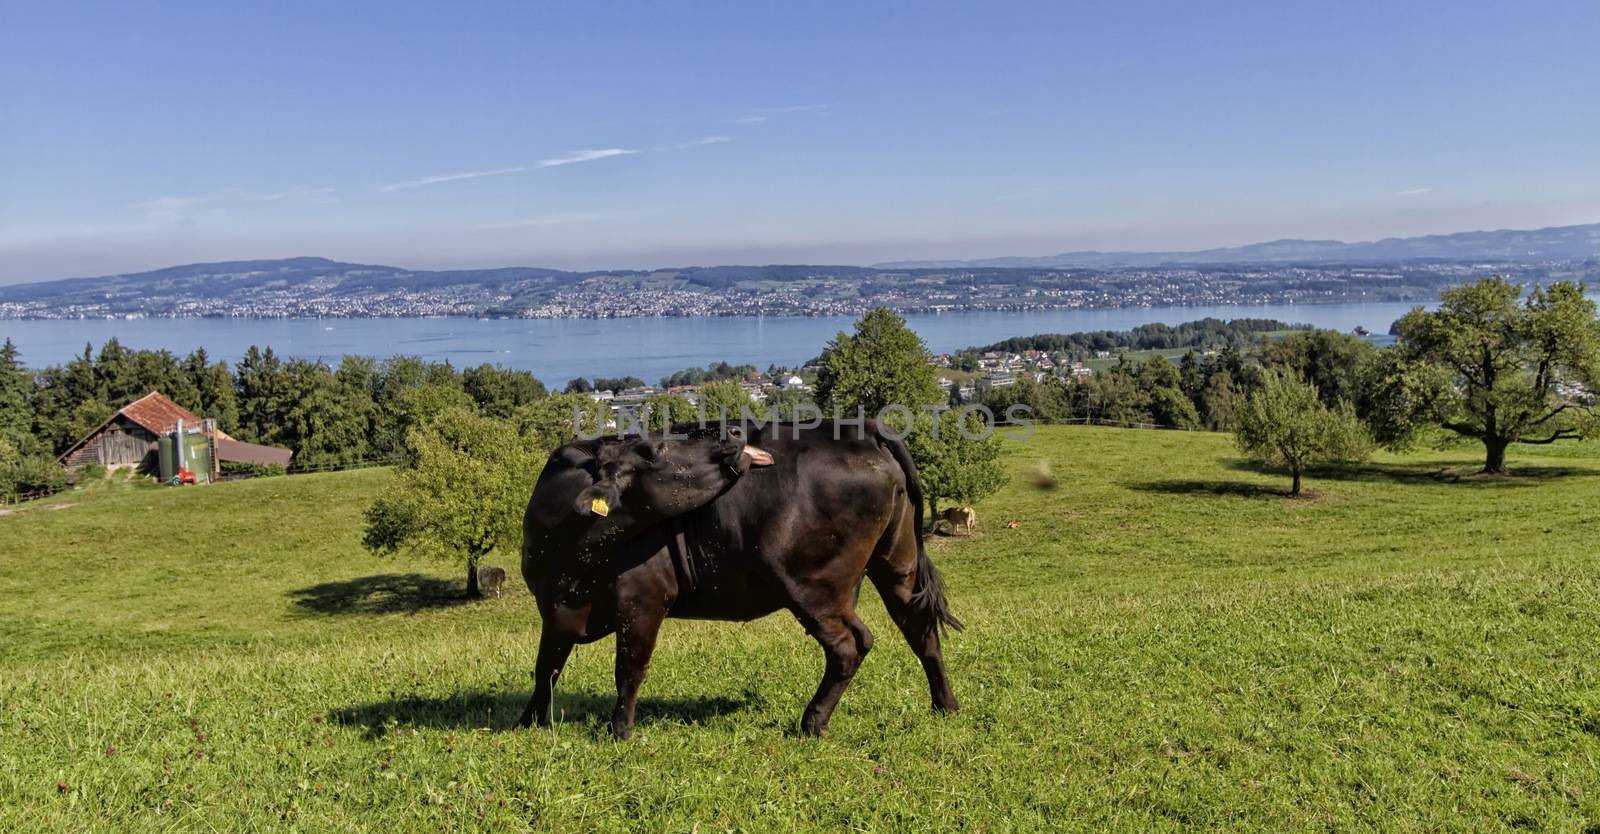 Cow black in front of the lake of Zurich